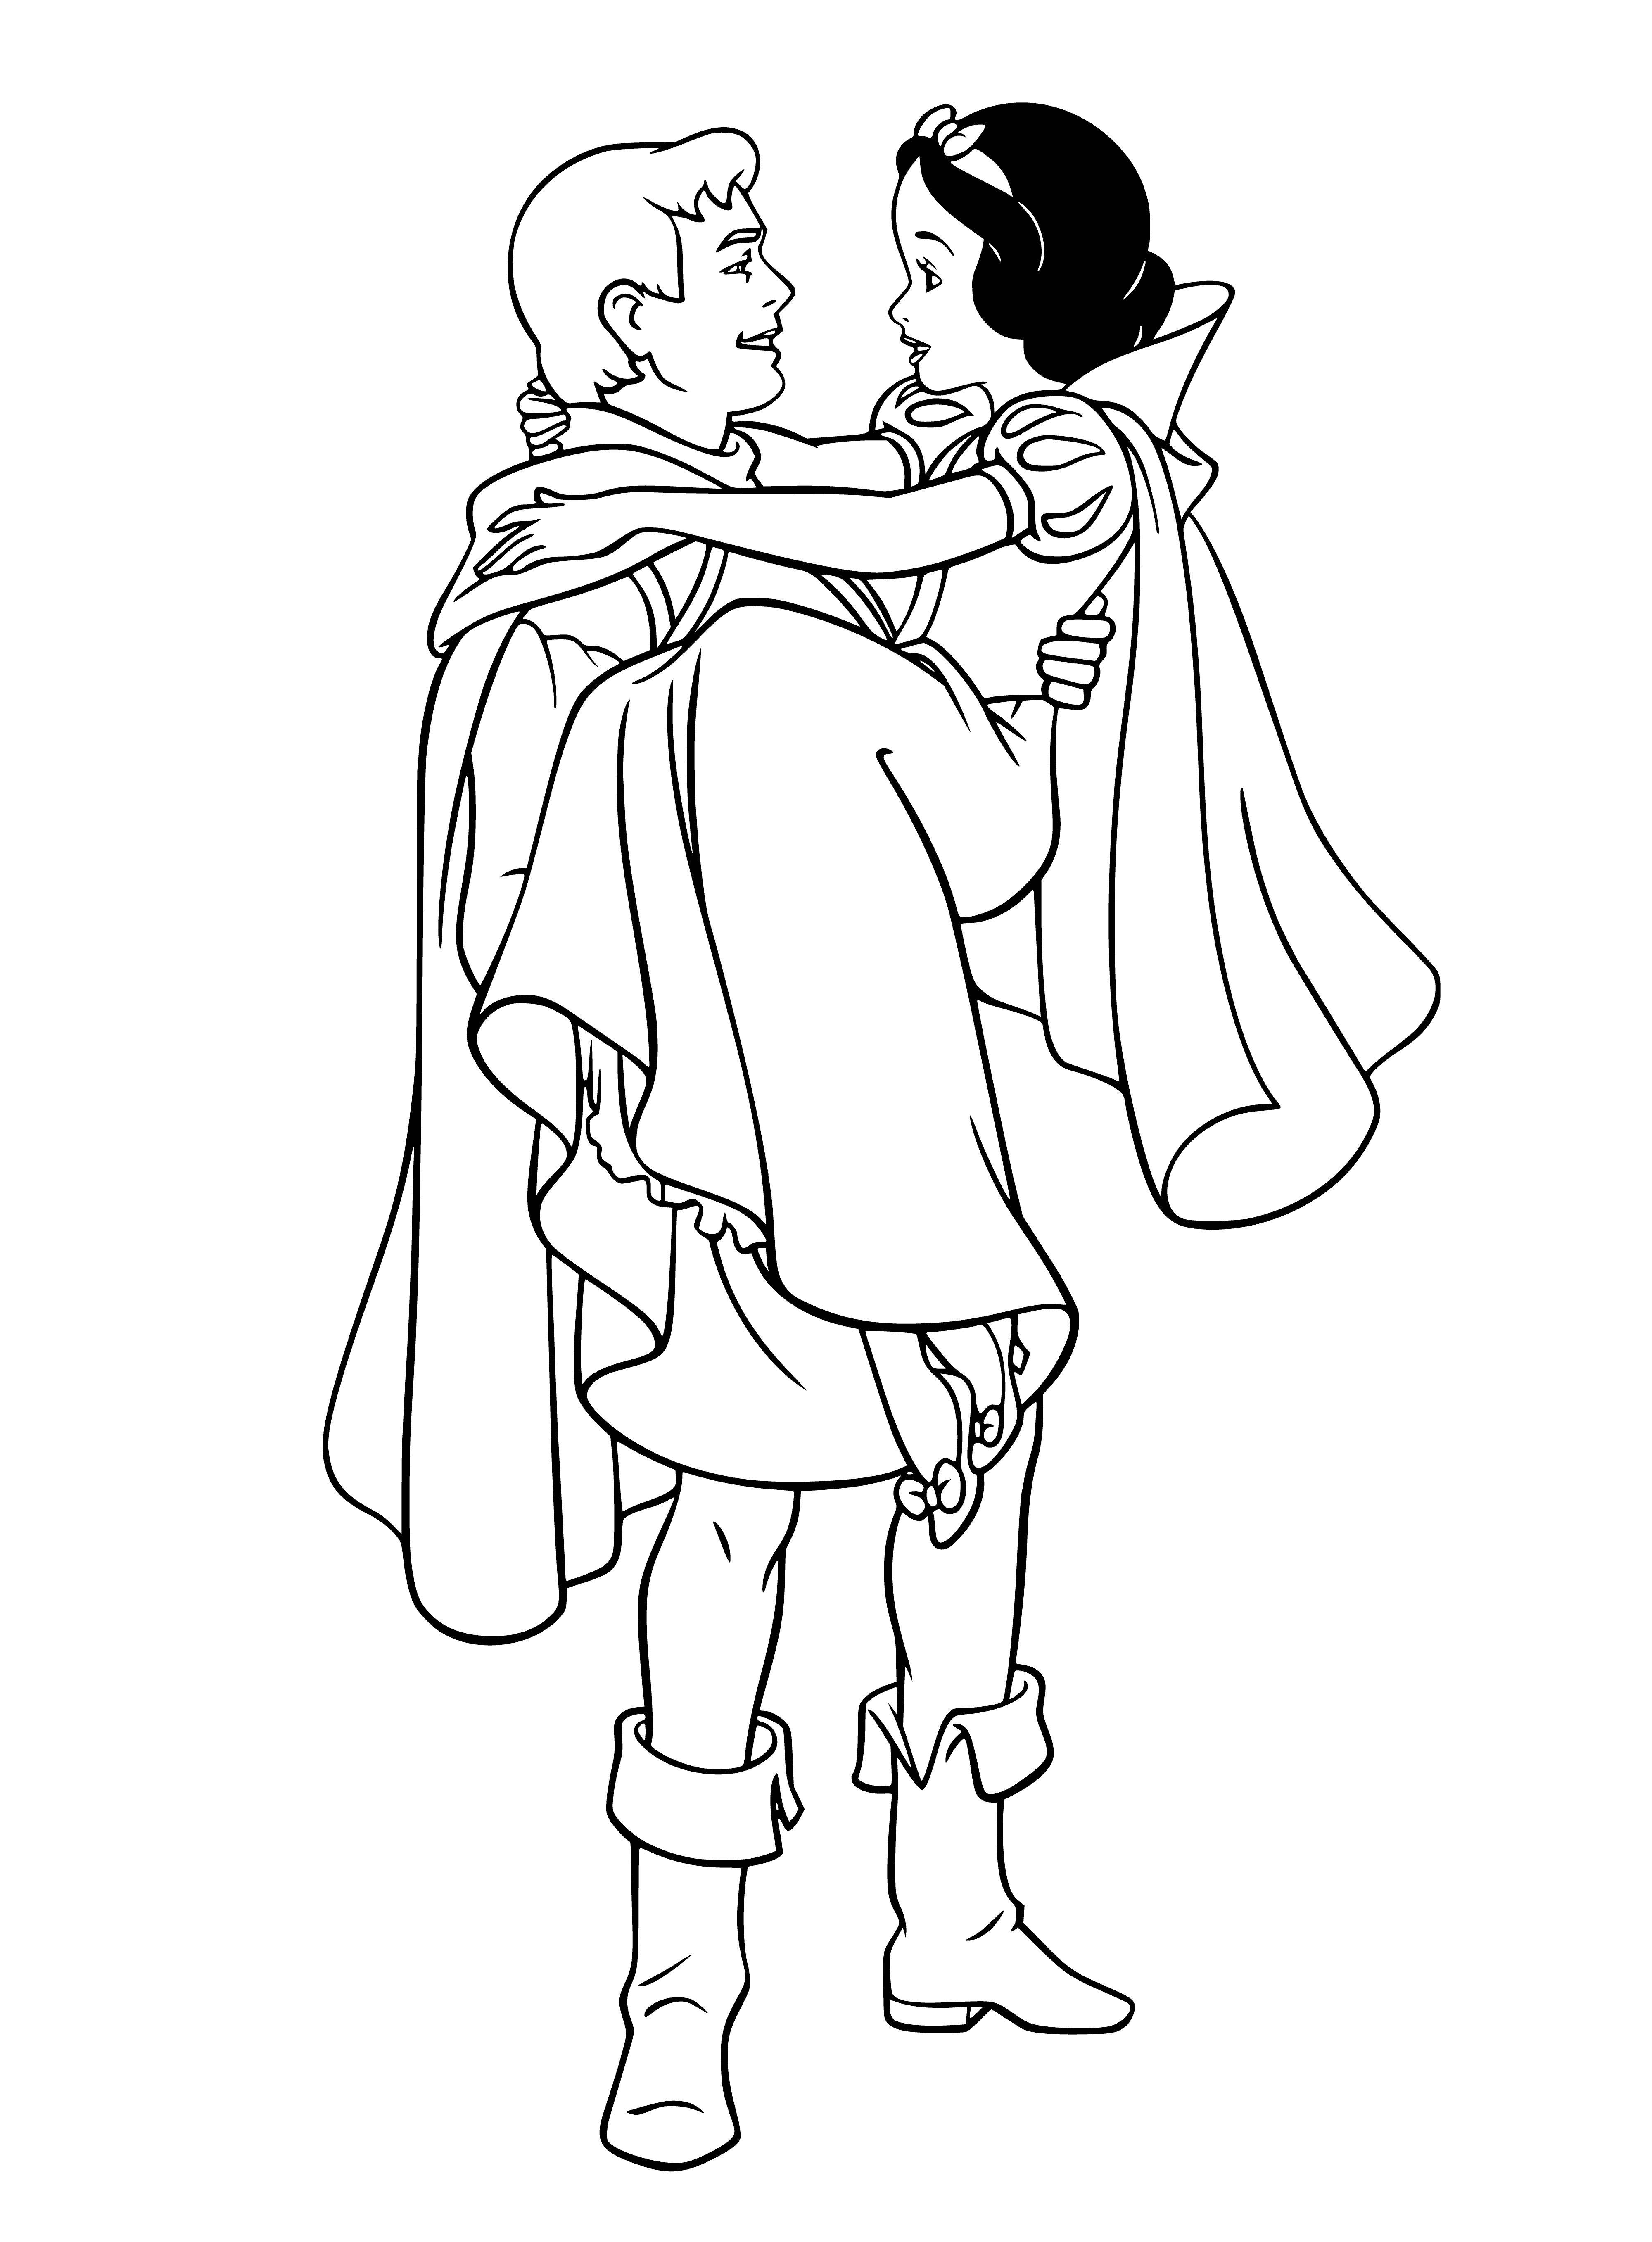 coloring page: The prince and Snow White are in deep conversation, with the prince's hand outstretched and Snow White leaning towards him.